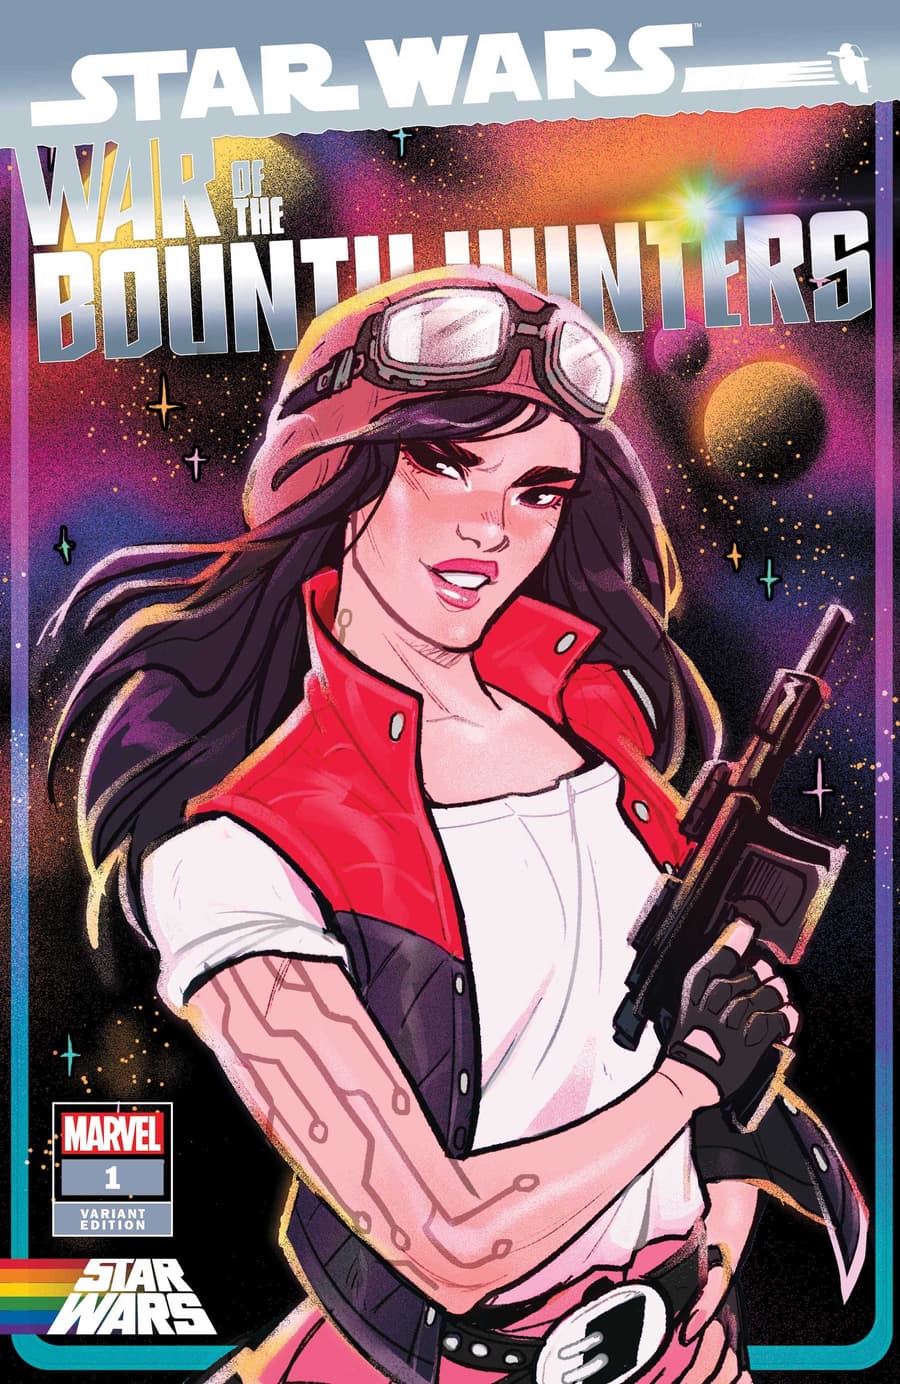 STAR WARS: WAR OF THE BOUNTY HUNTERS #1 PRIDE VARIANT COVER by BABS TARR (APR210950)